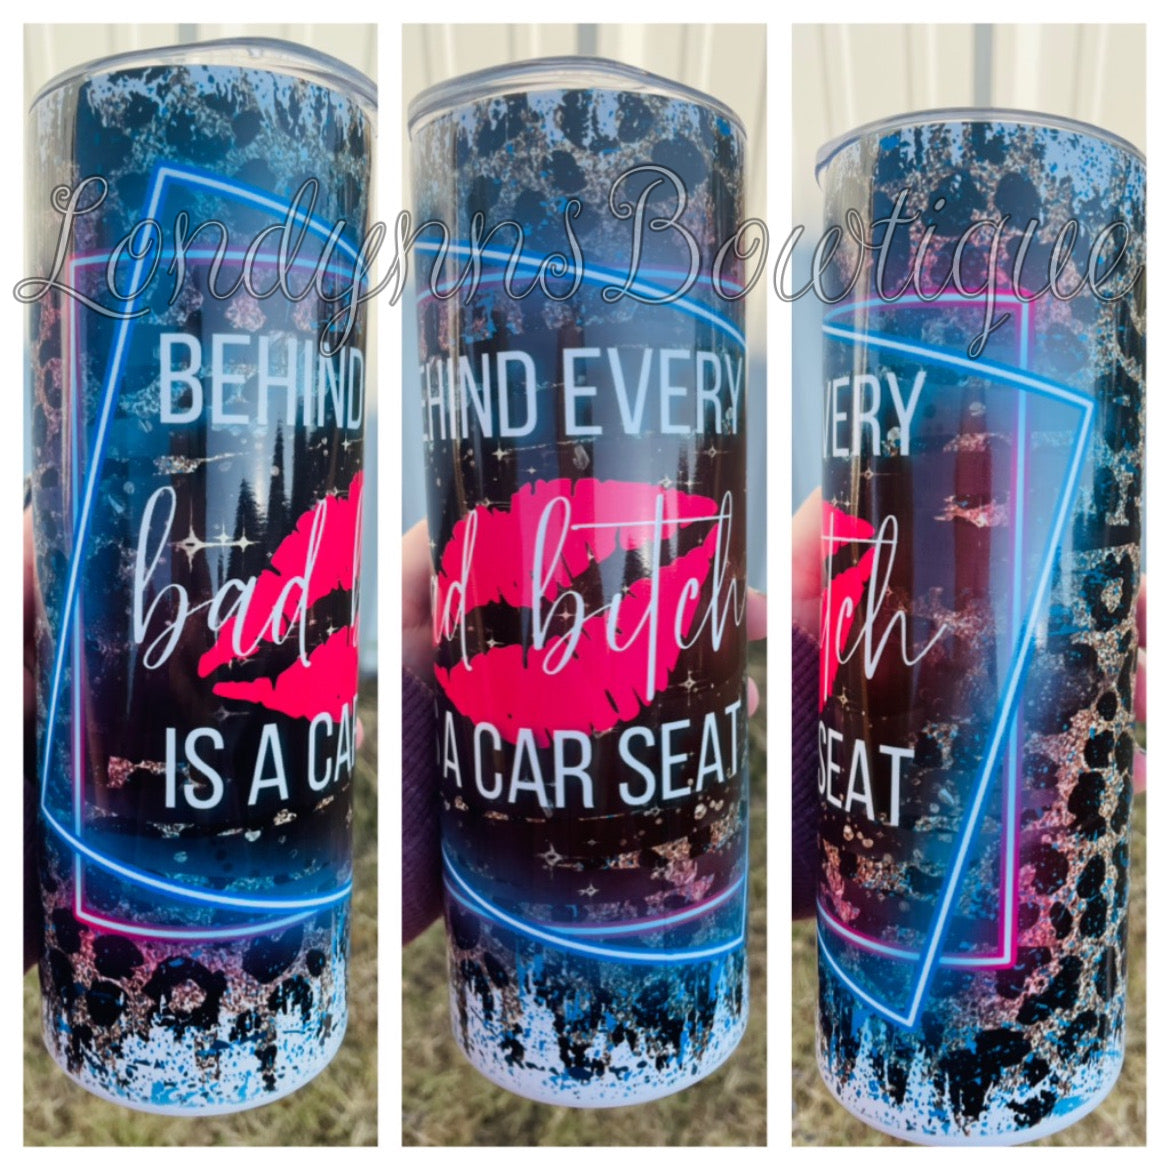 Behind every bad bit*ch is a car seat tumbler